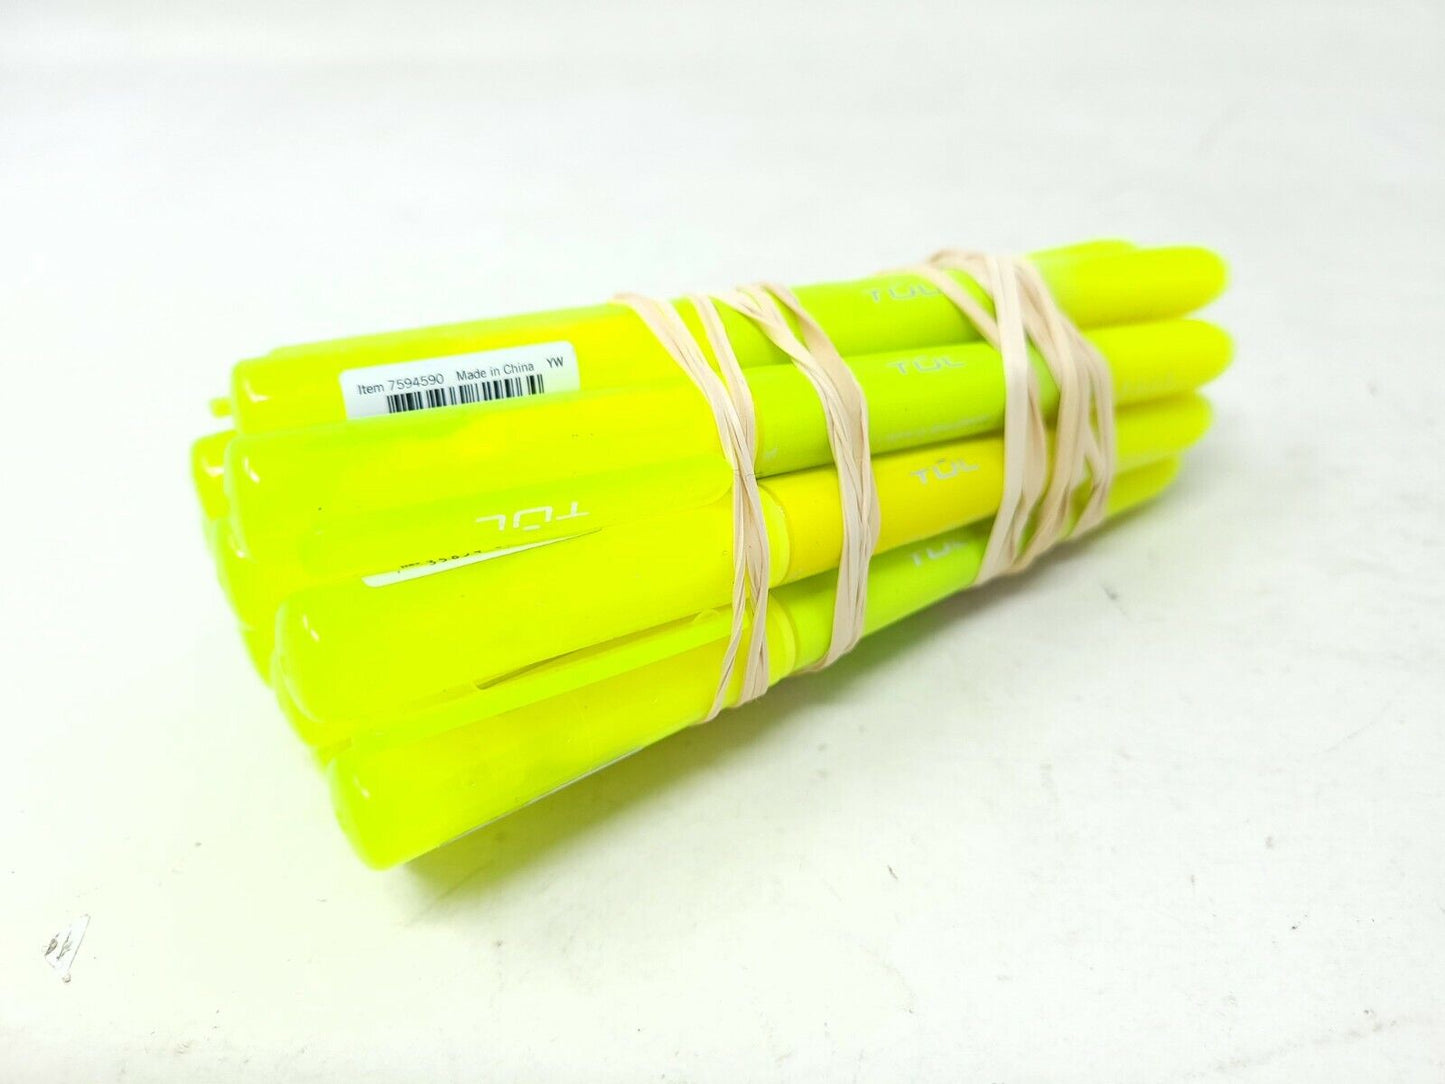 Lot of 12x TUL Pen Style Highlighters, Chisel Point, Yellow - NEW